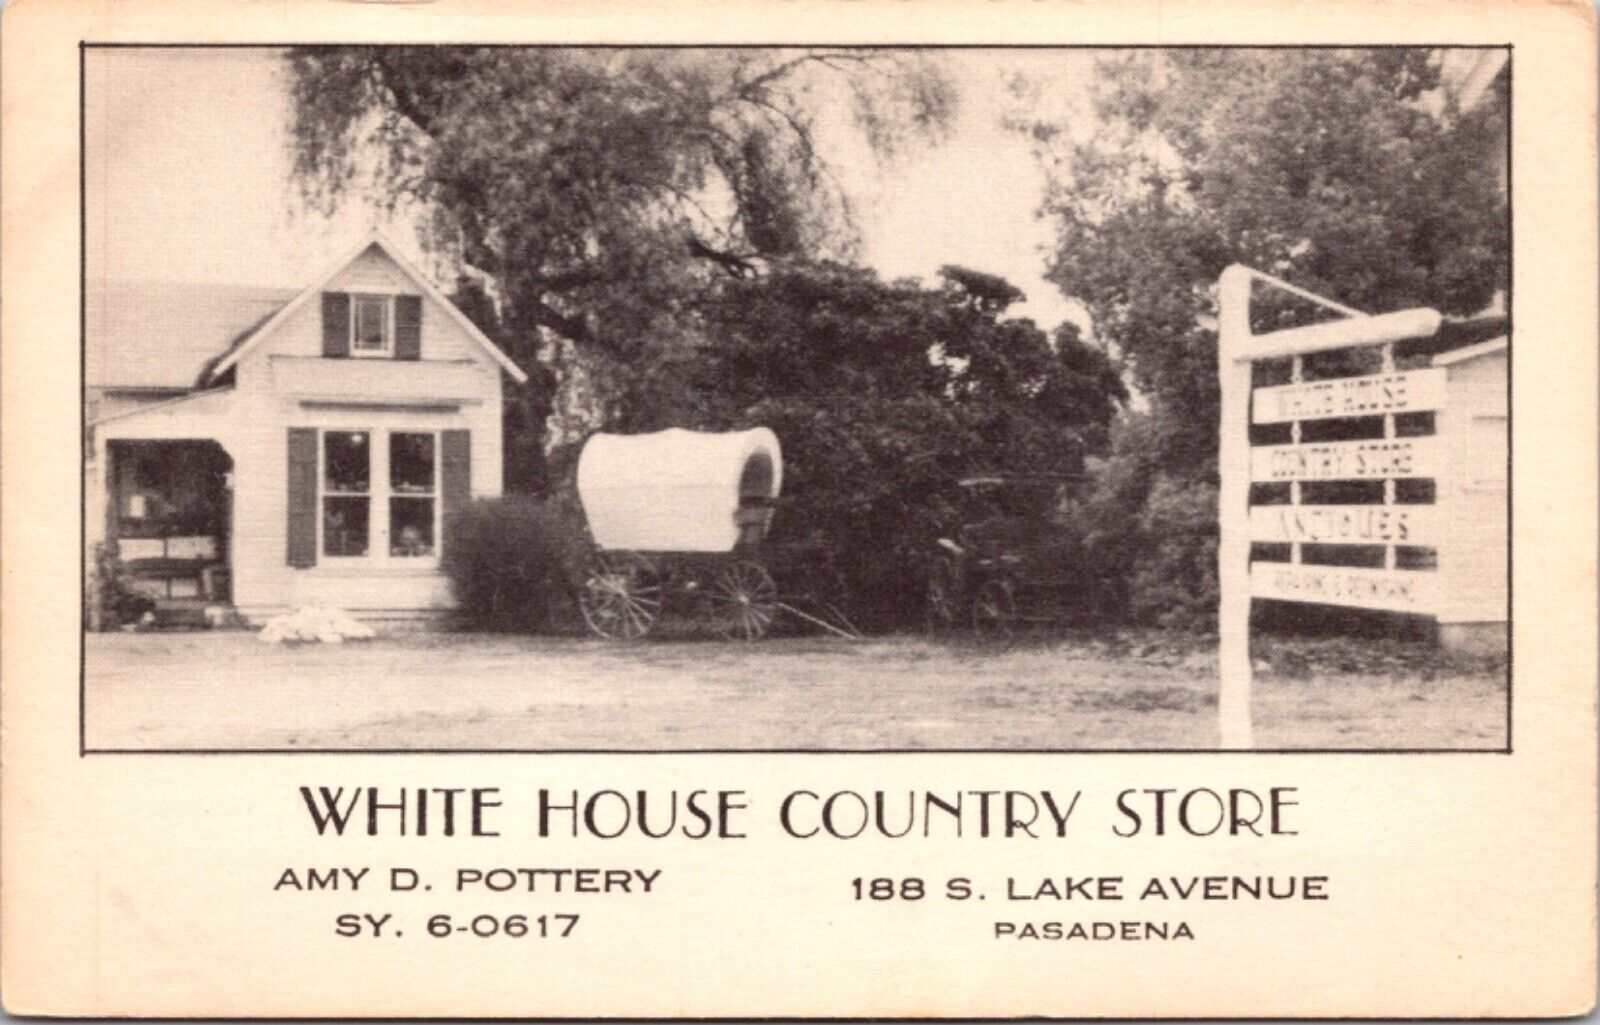 PC White House Country Store Antiques 188 S. Lake Avenue in Pasadena, California